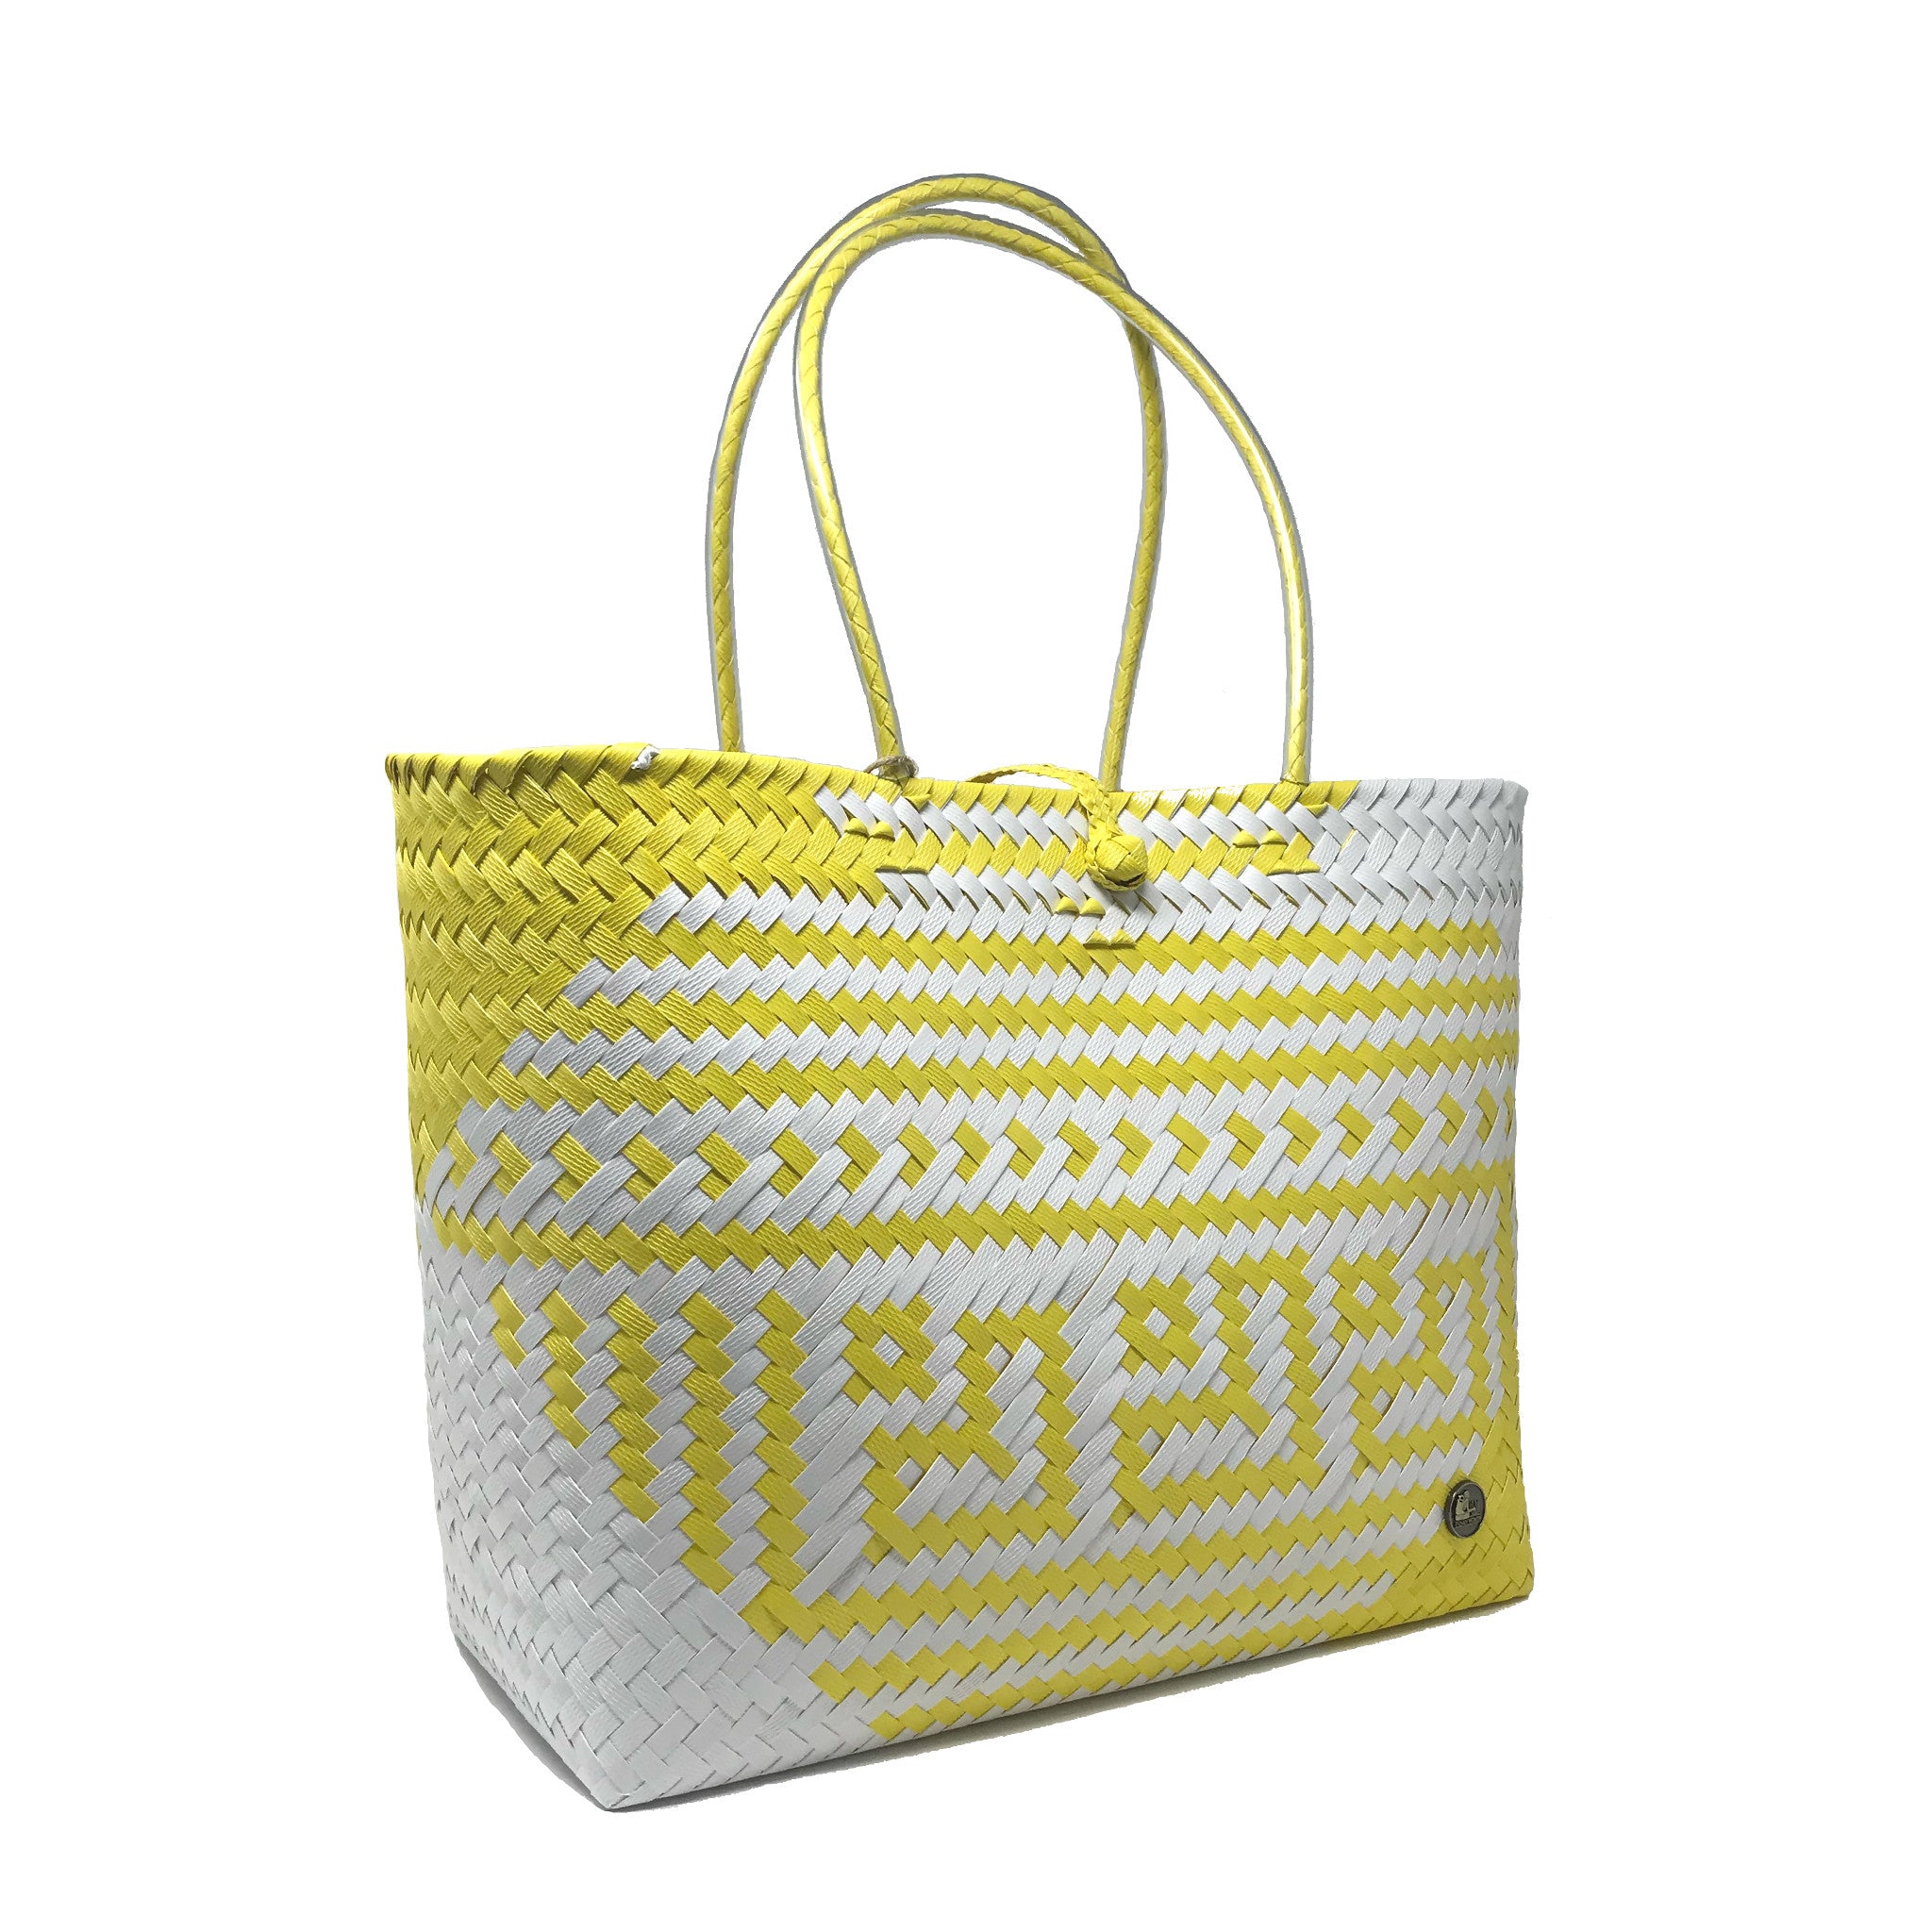 Yellow and white large size tote bag at a 45-degree angle.